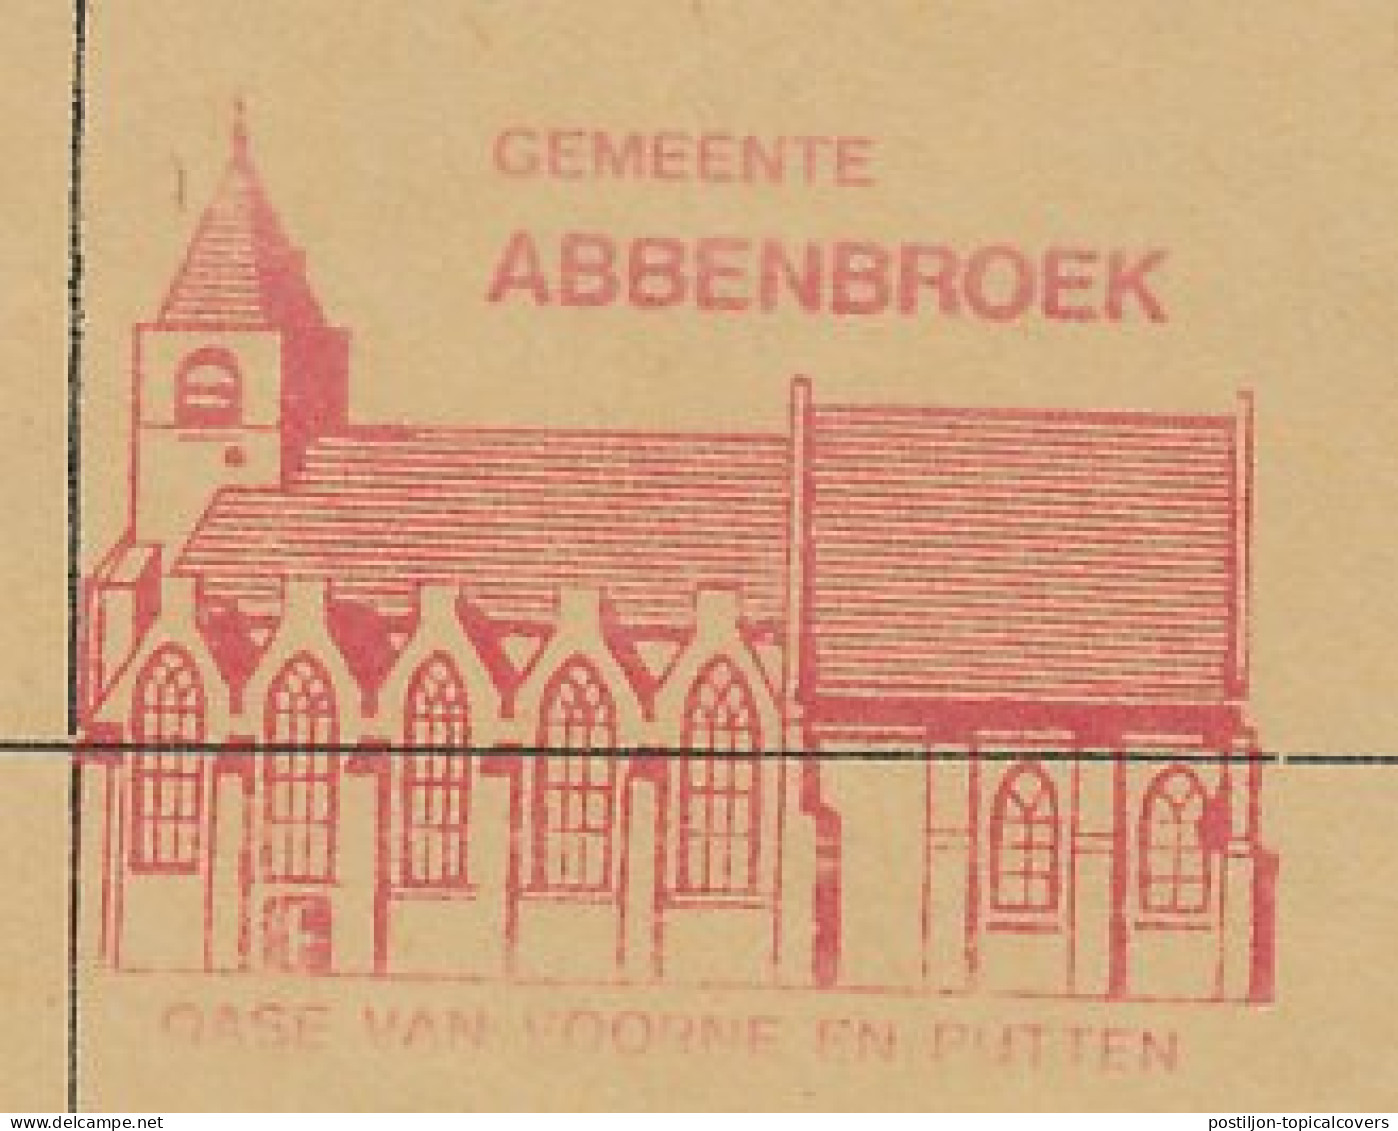 Meter Cover Netherlands 1967 Church Abbenbroek - Churches & Cathedrals